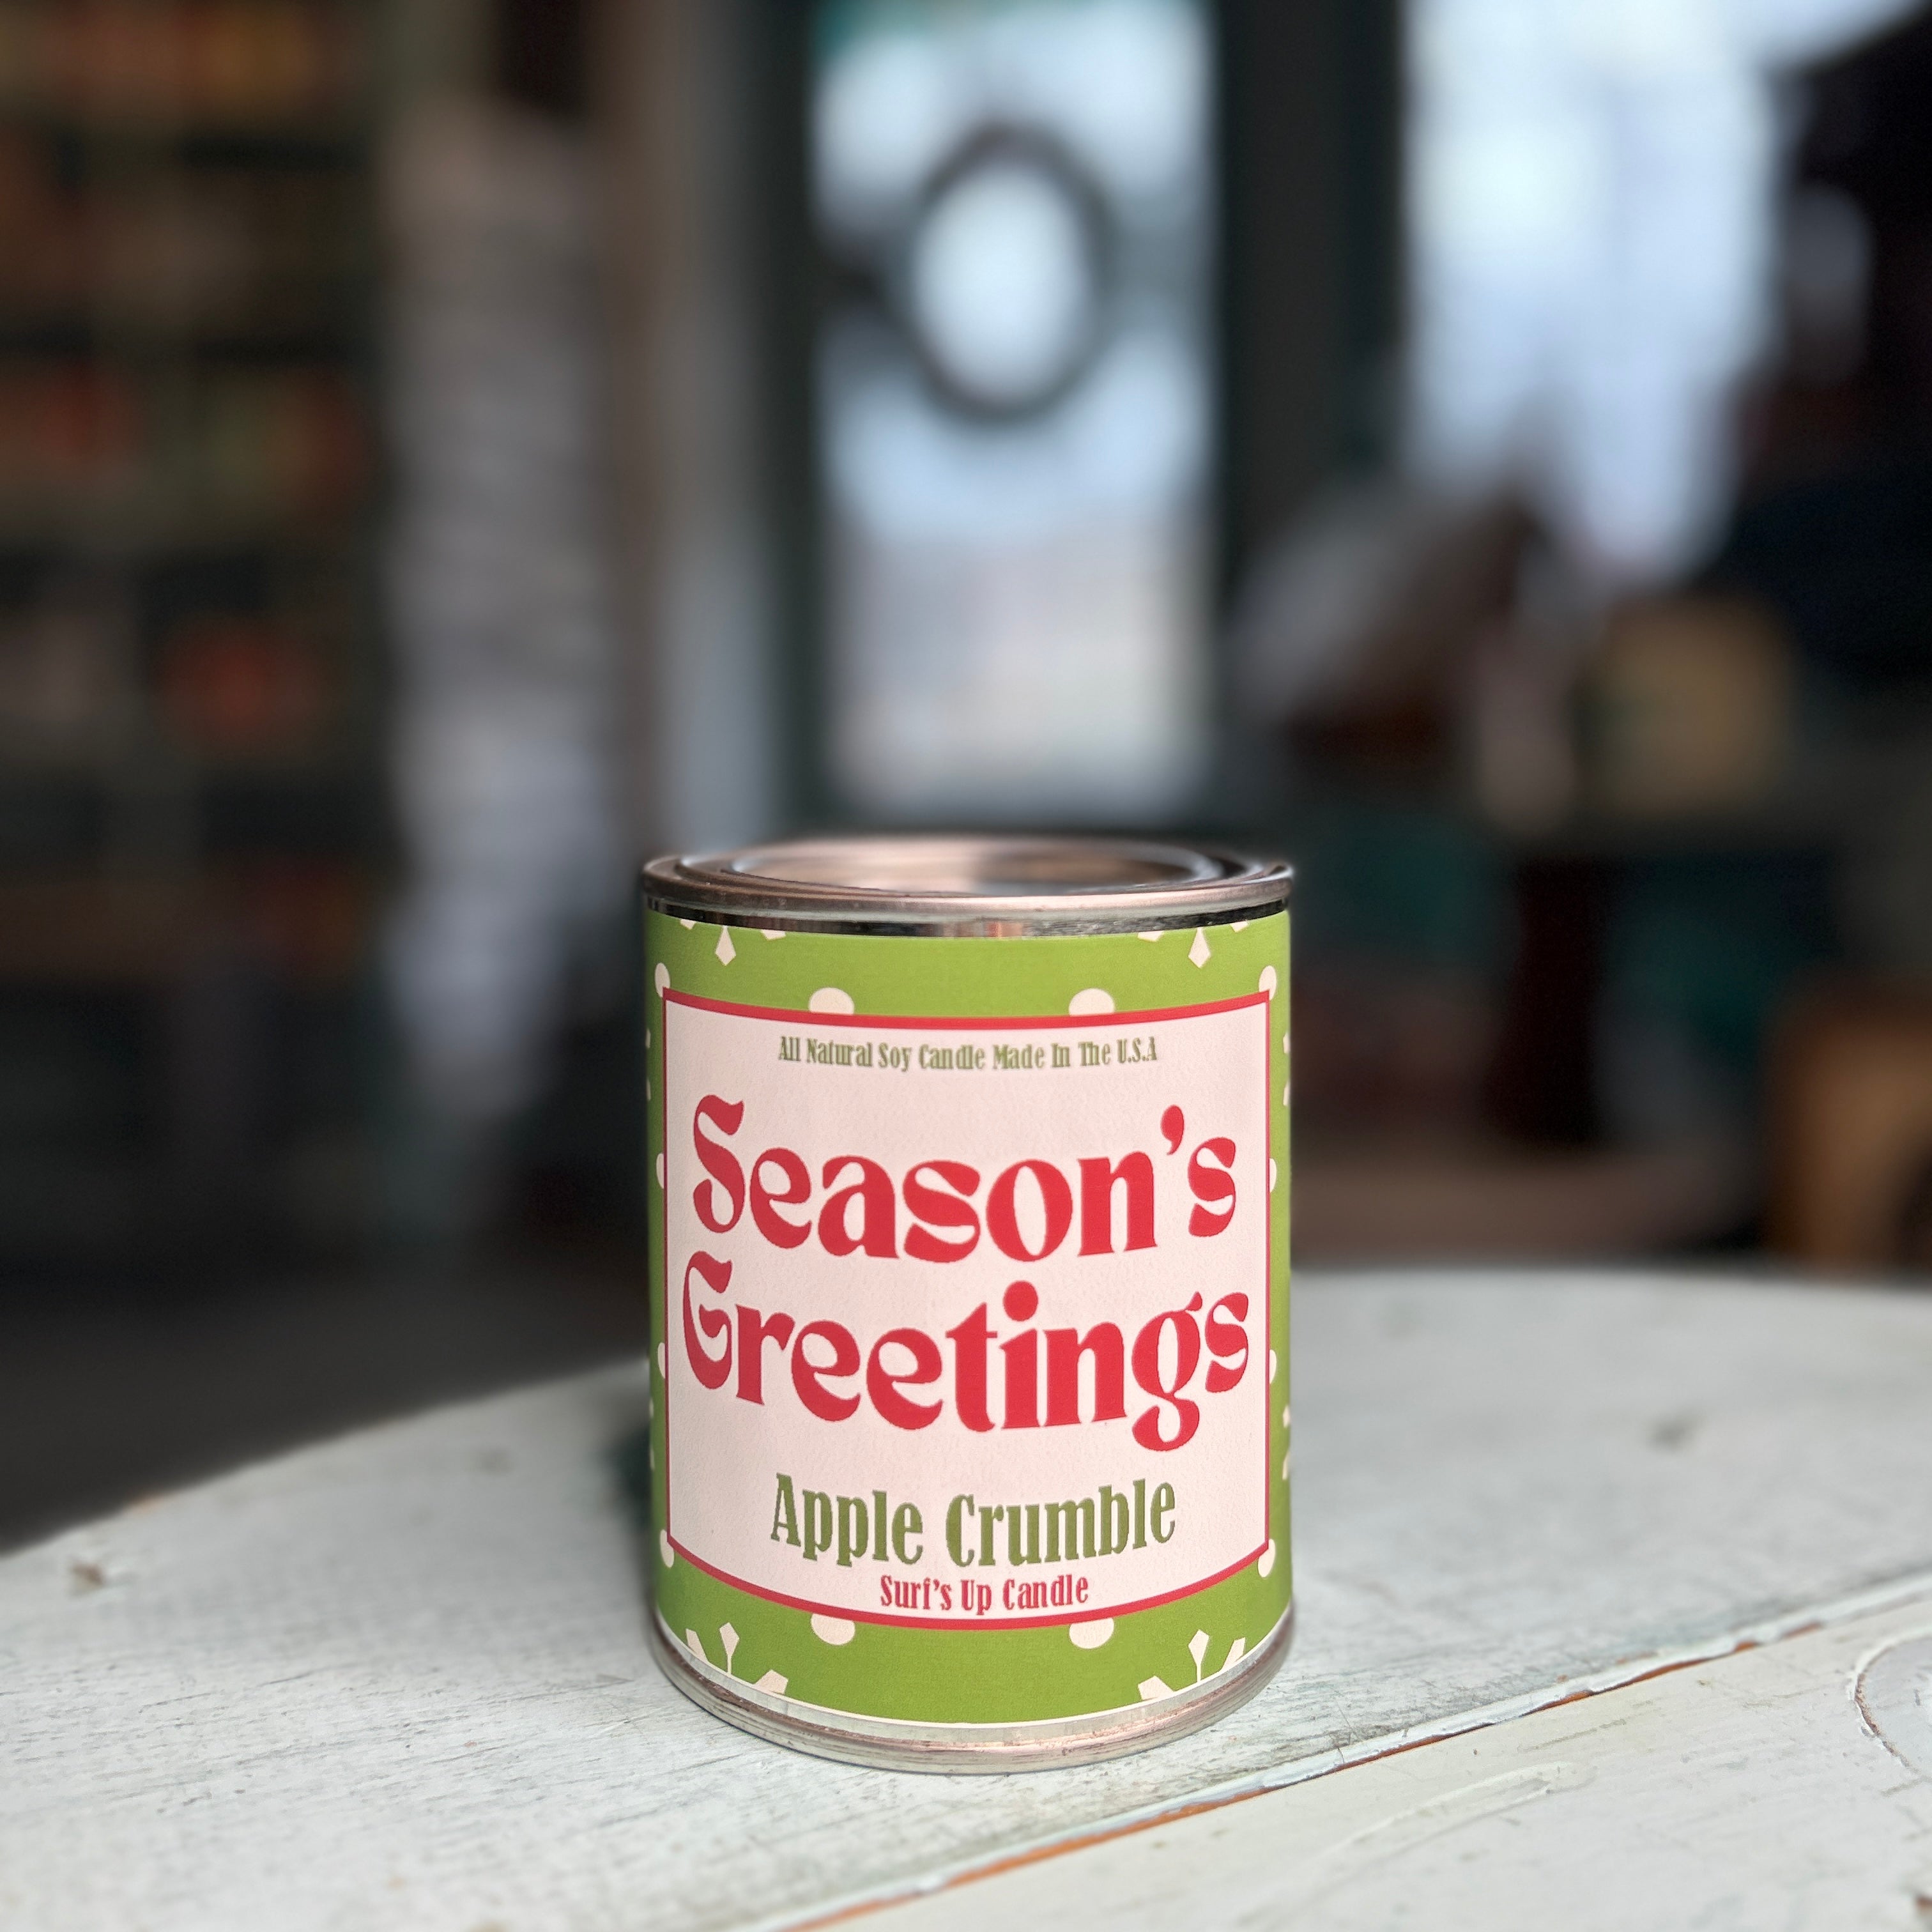 Season's Greetings Apple Crumble Paint Can Candle - Christmas Collection